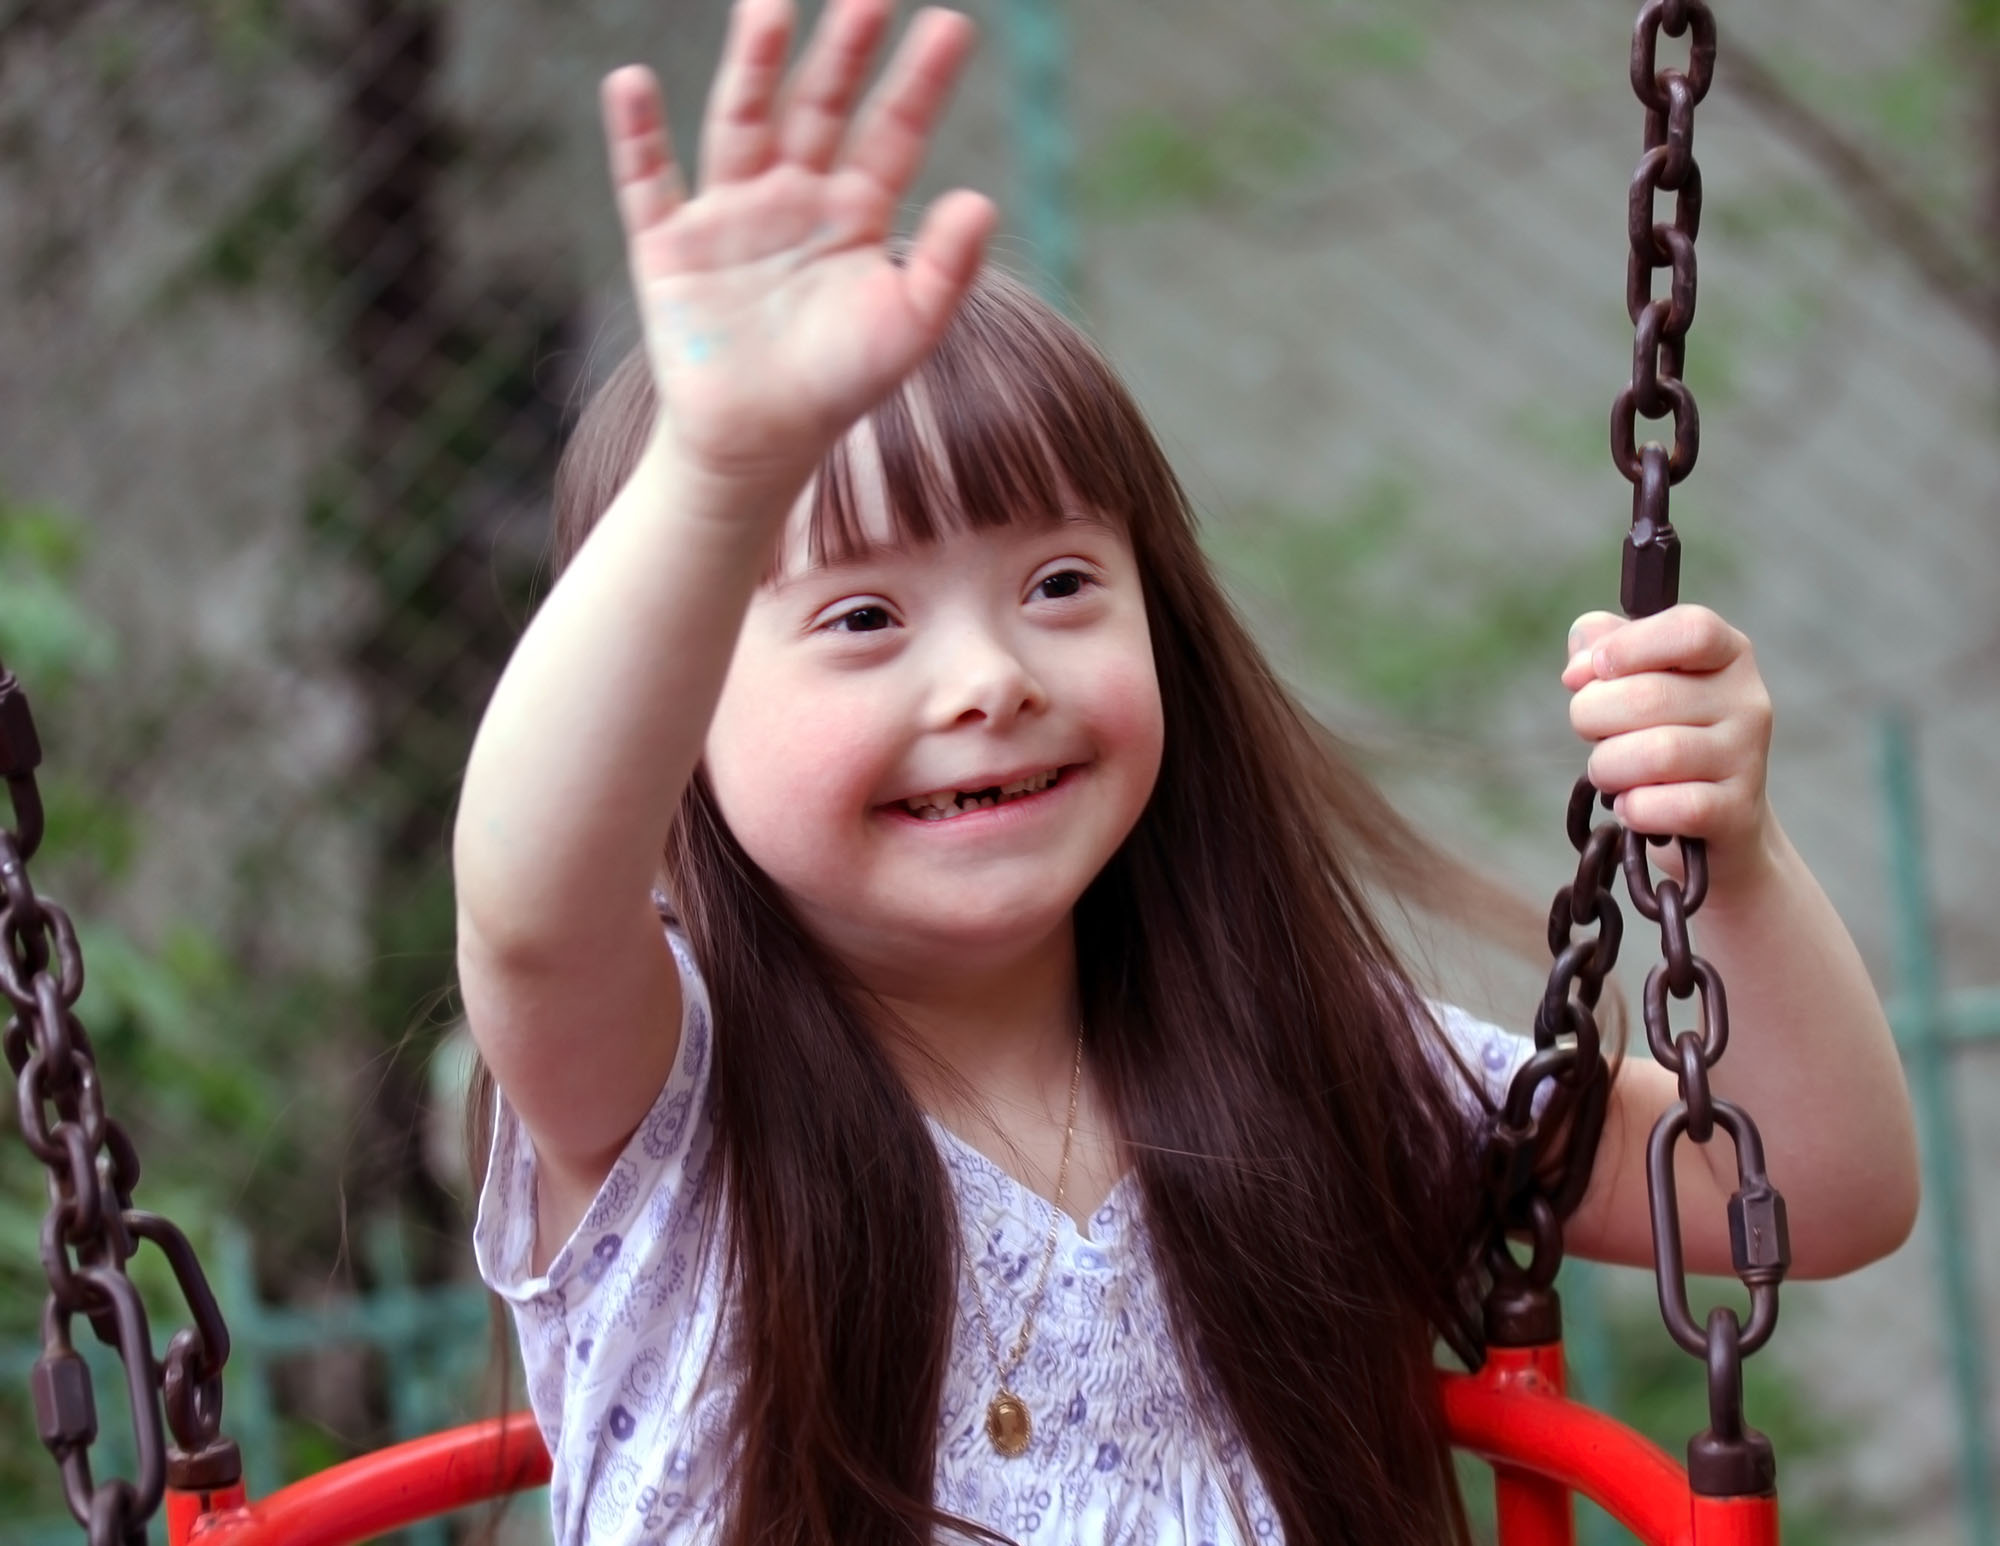 Children With Down Syndrome - Physical Complications & What To Do?